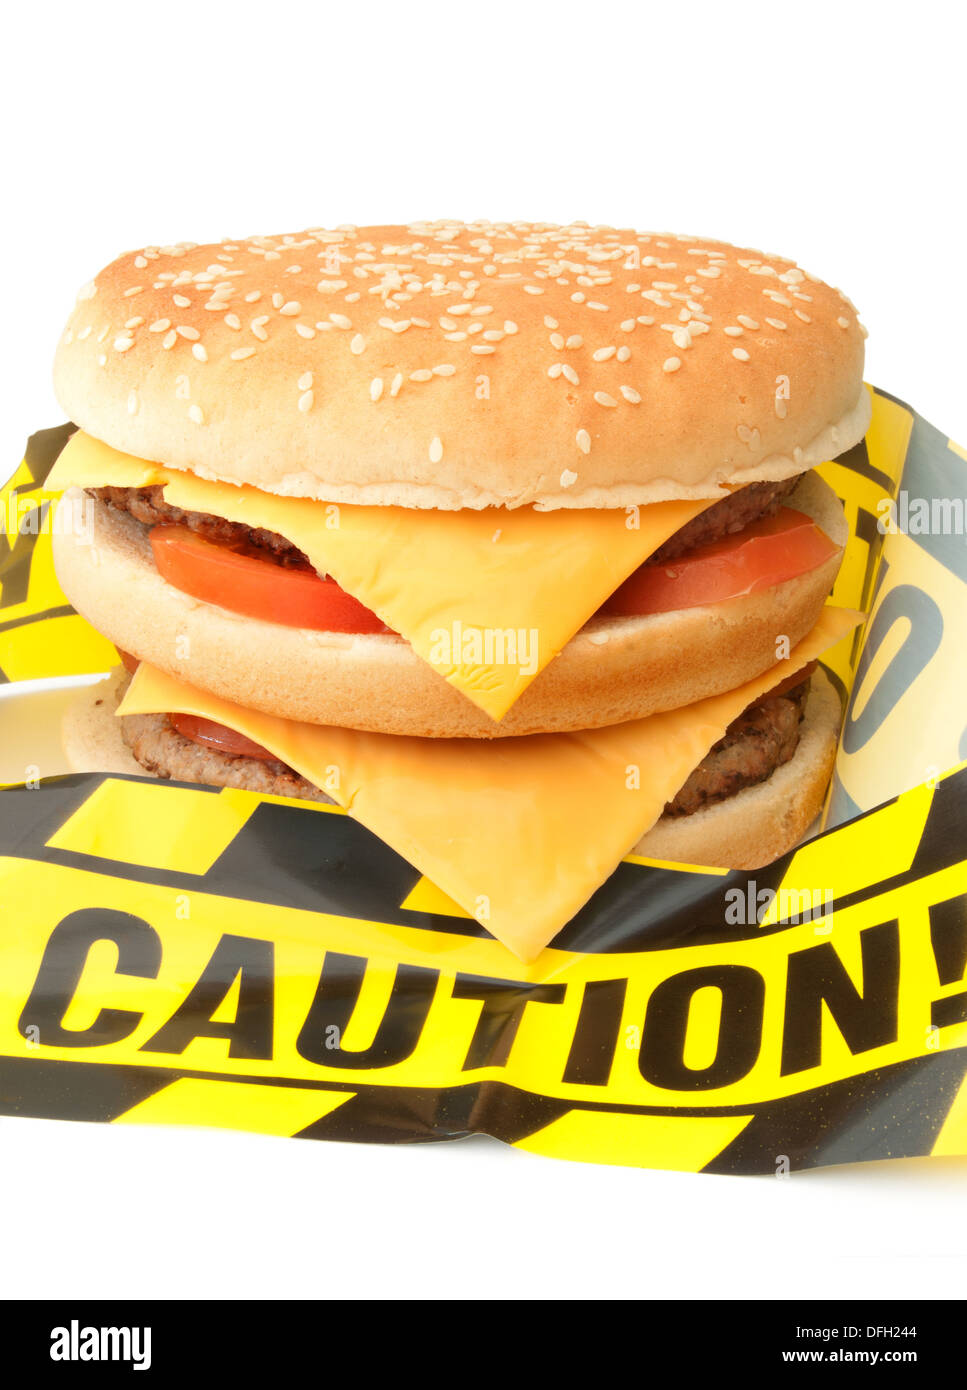 Unhealthy fast food caution Stock Photo